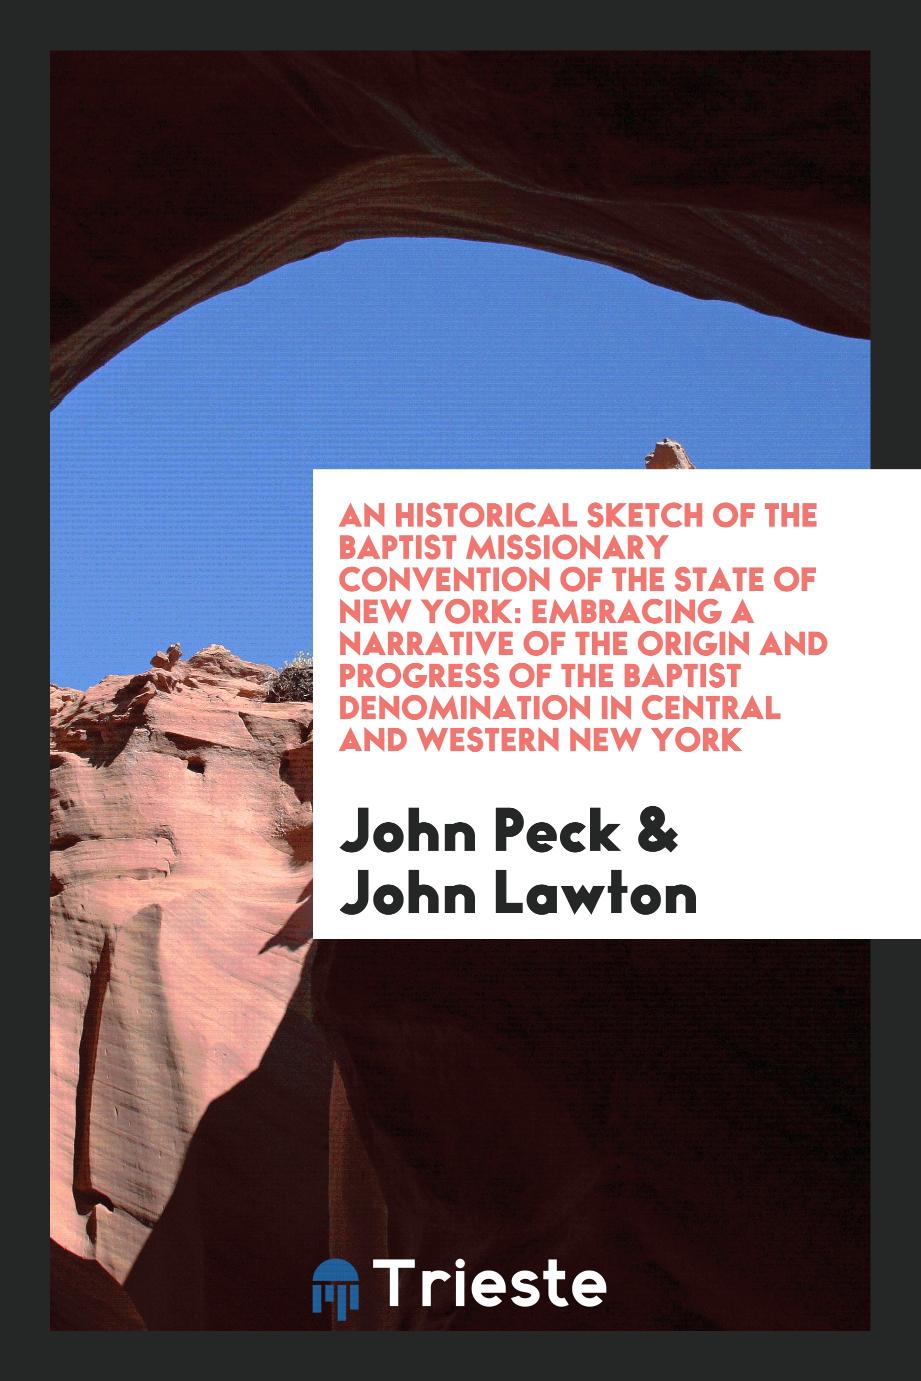 An Historical sketch of the Baptist Missionary Convention of the State of New York: embracing a narrative of the origin and progress of the Baptist denomination in central and western New York